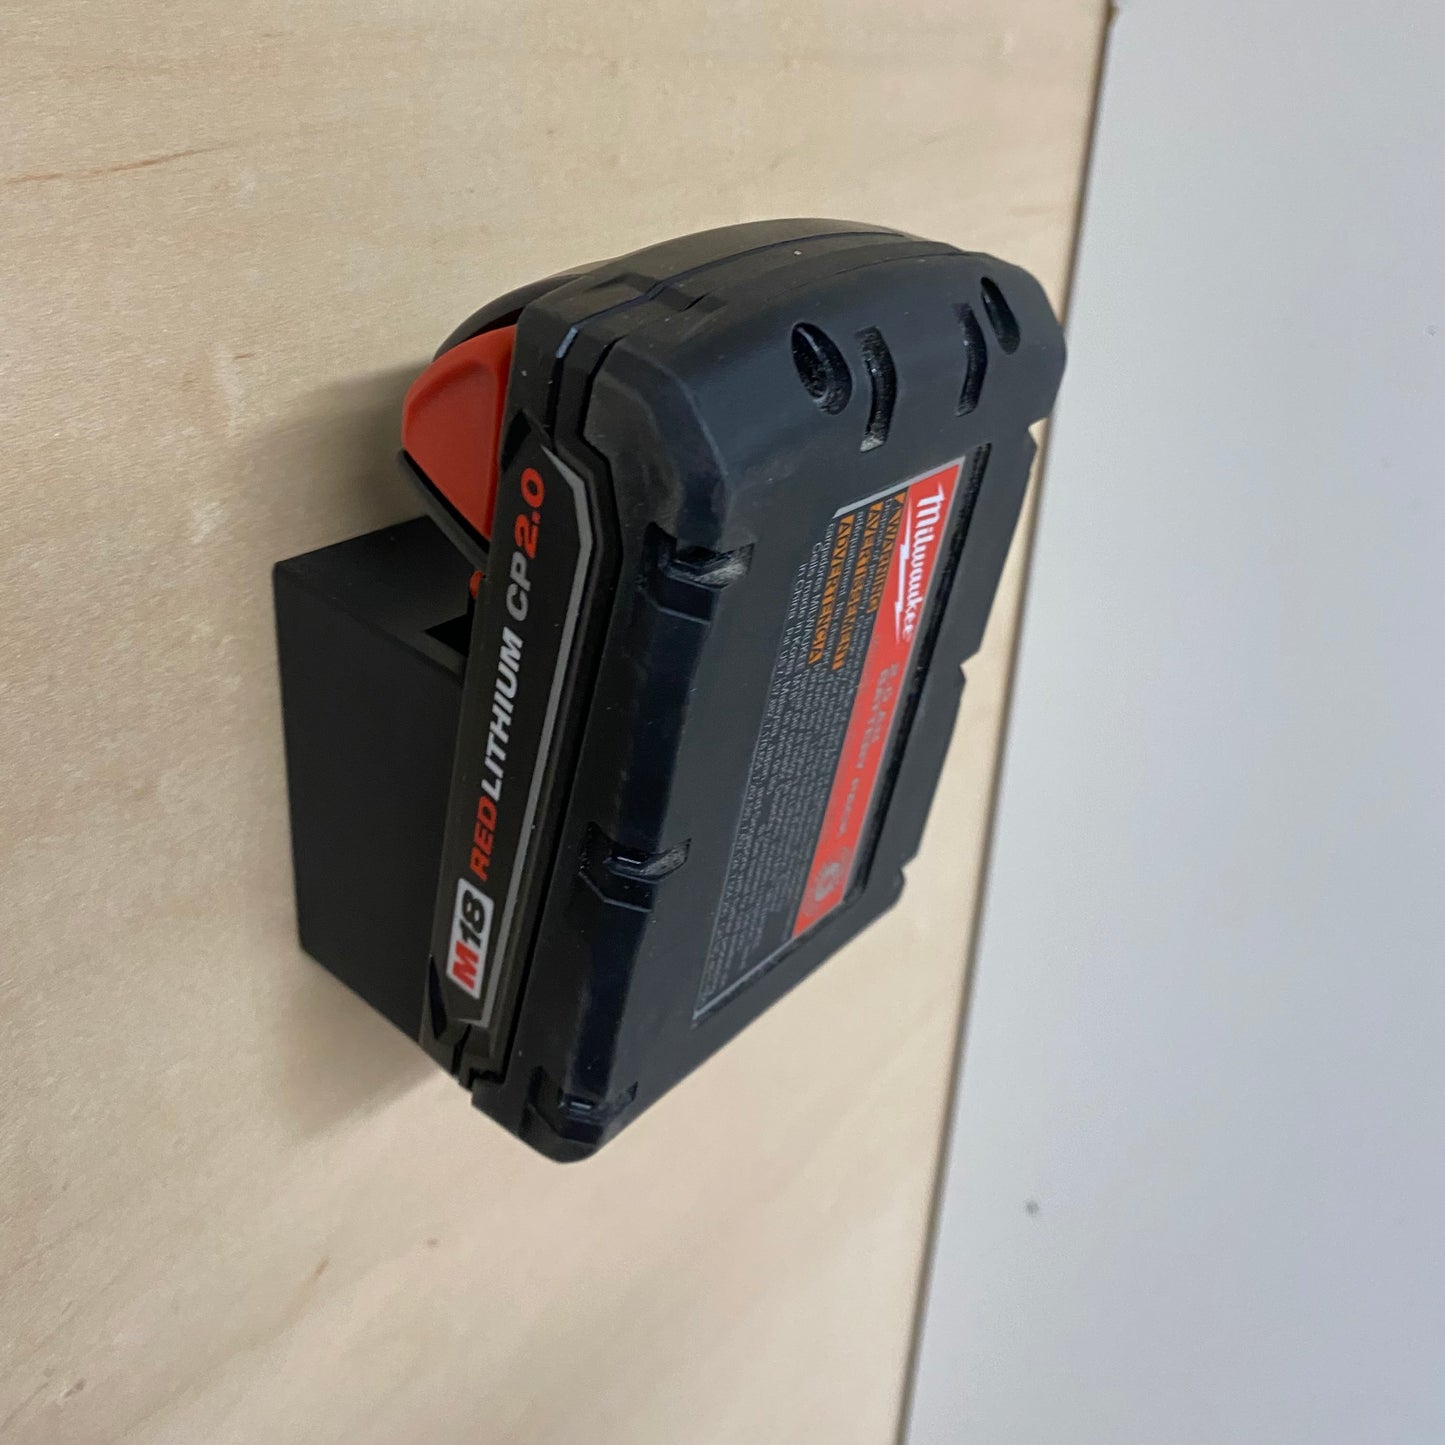 Downloadable File - Cordless Tool & Battery Holders